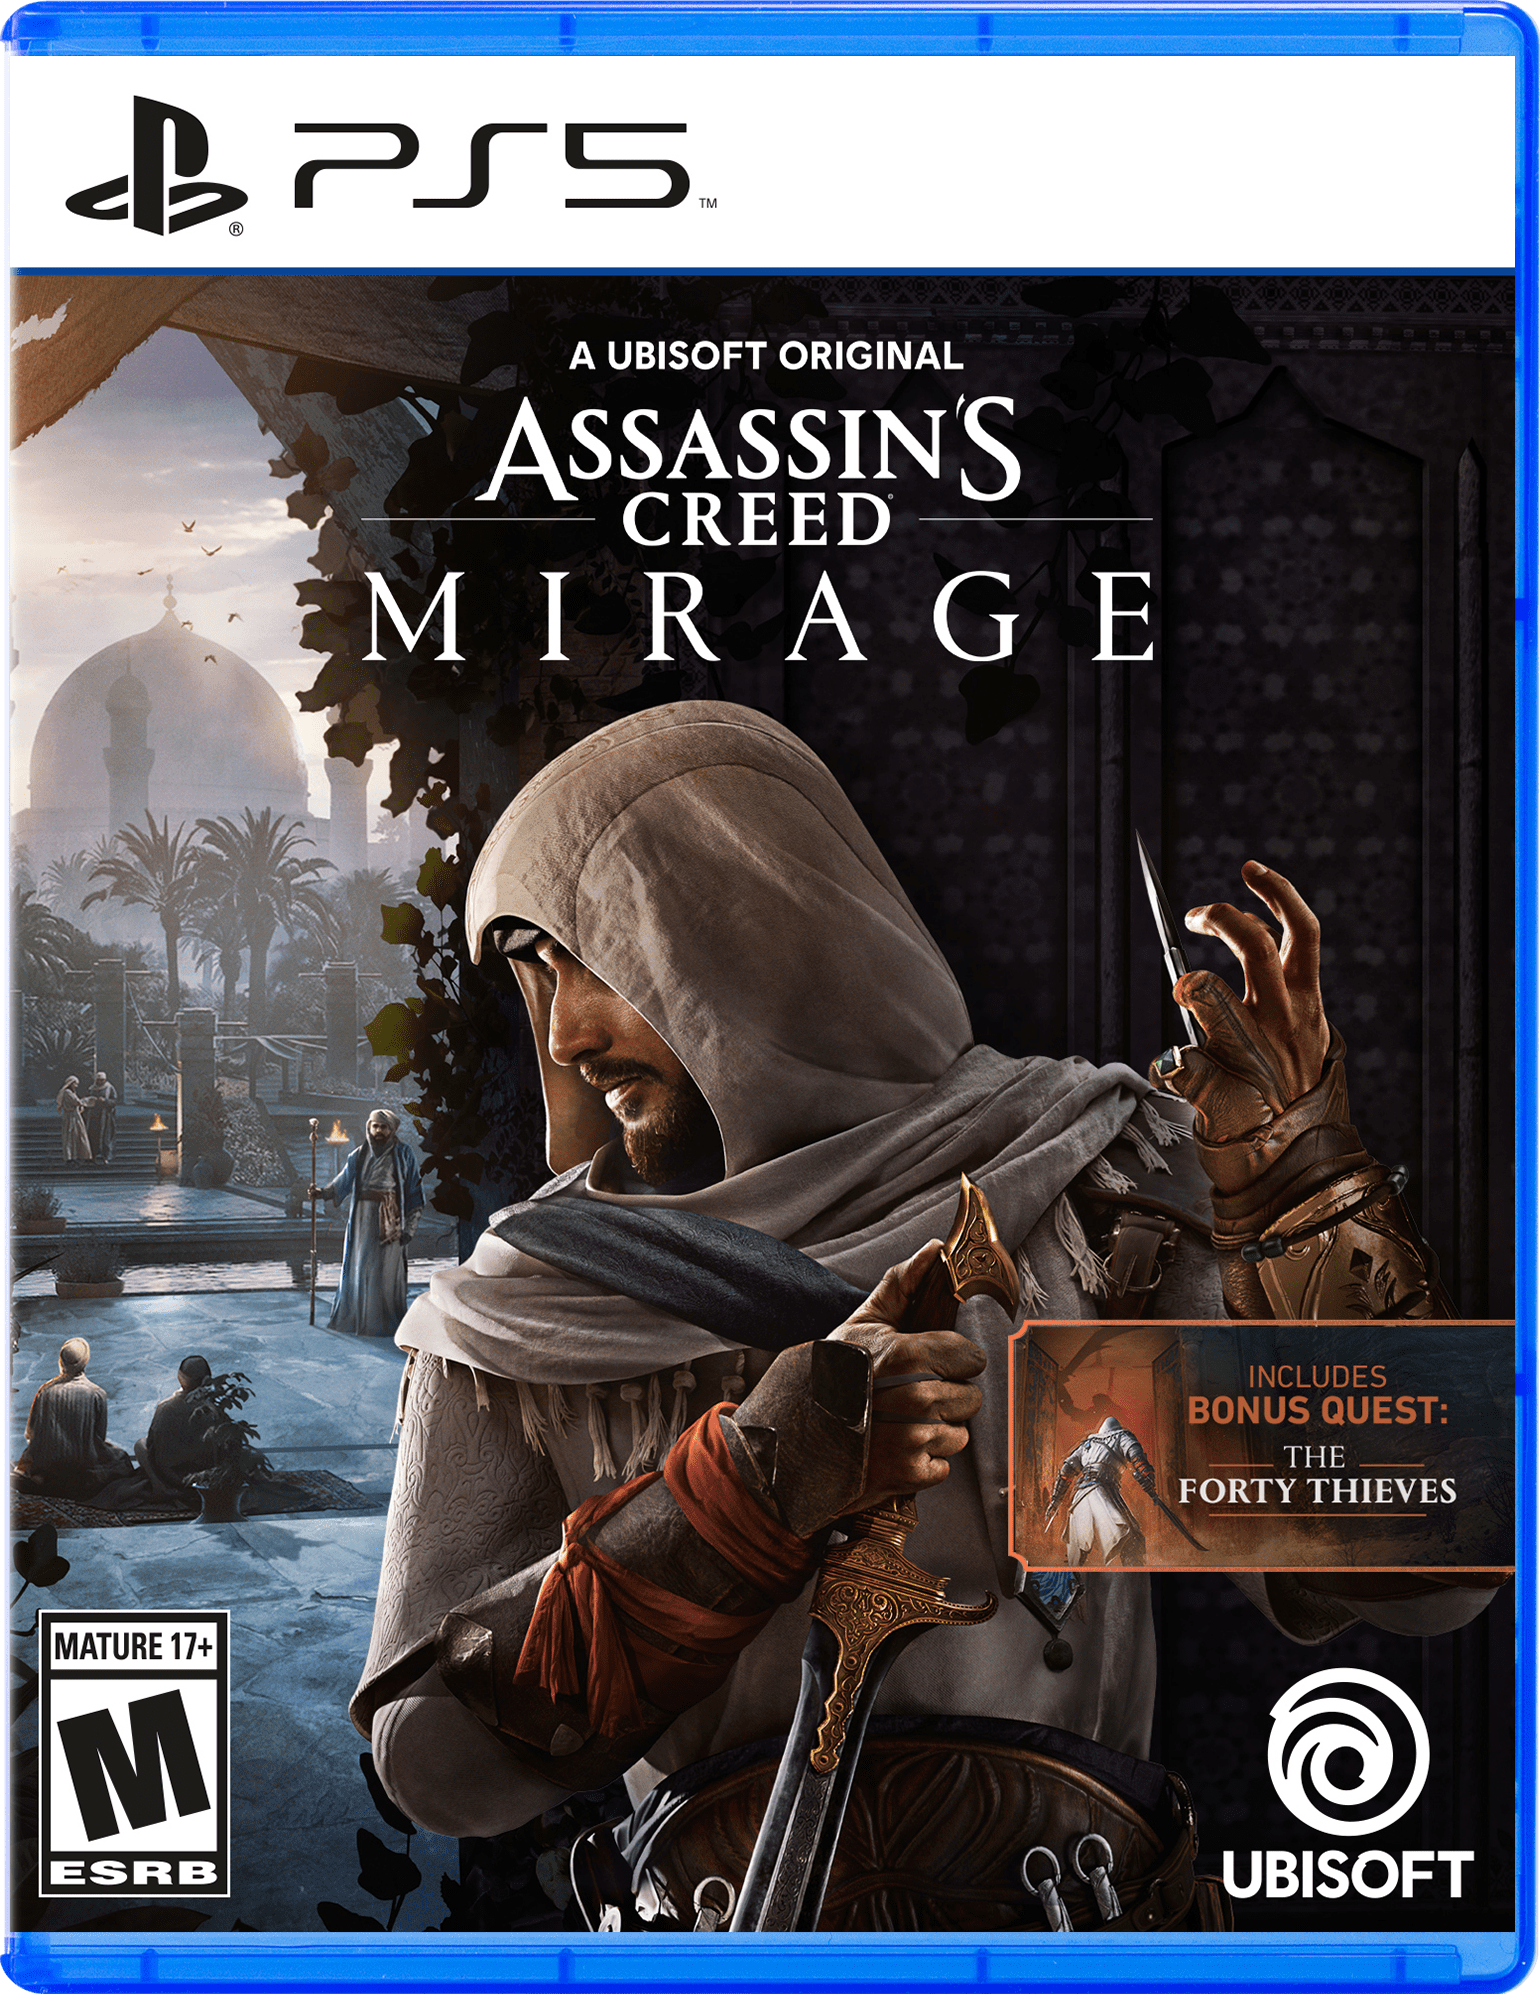 Assassin's Creed Mirage Deluxe Edition - PlayStation 5, PlayStation 5